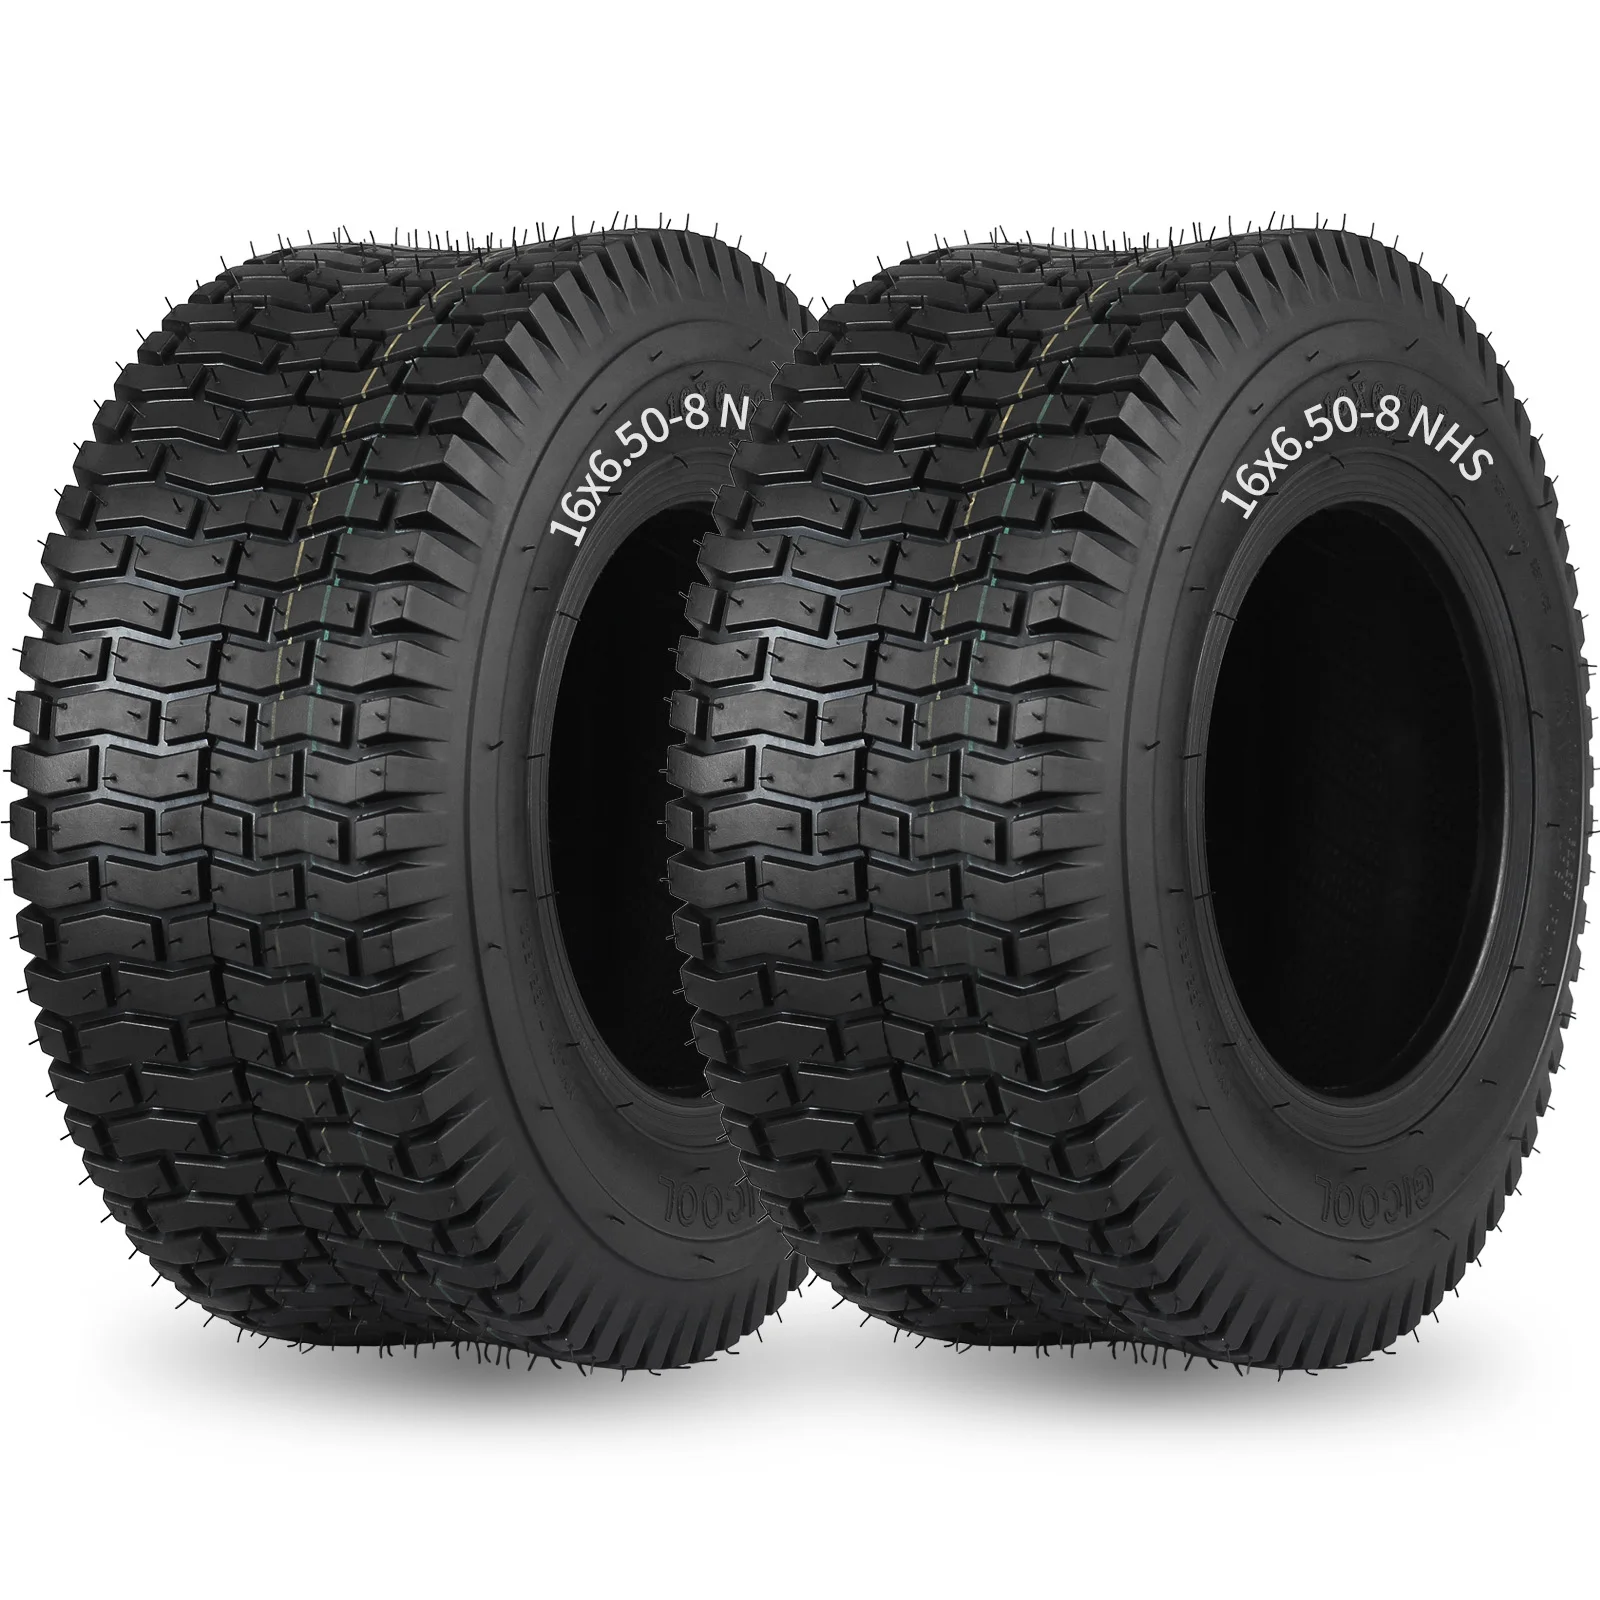 16x6.50-8 Turf-V Pattern Lawnmower Tubeless Tire, 16x6.5-8 for Tractor Riding Lawnmowers